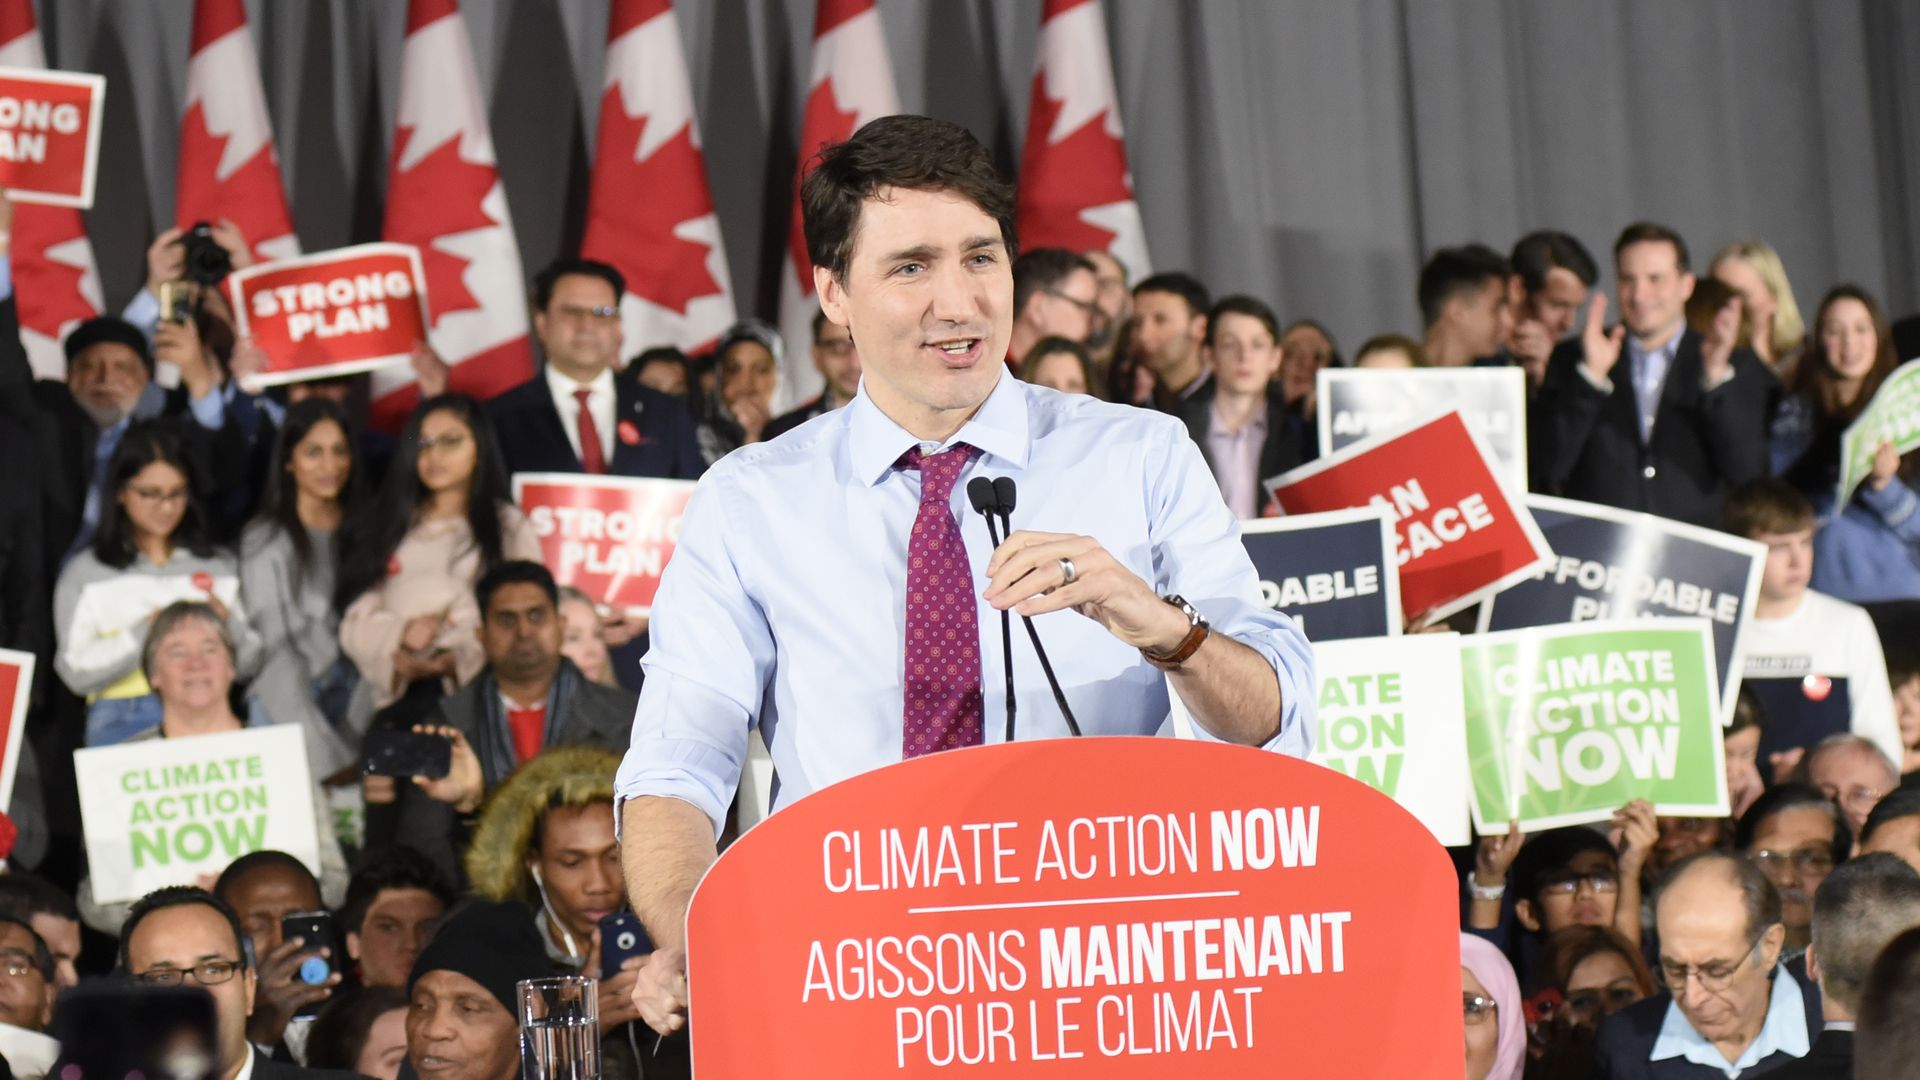 Trudeau heckled during climate speech after second minister resigns - Axios